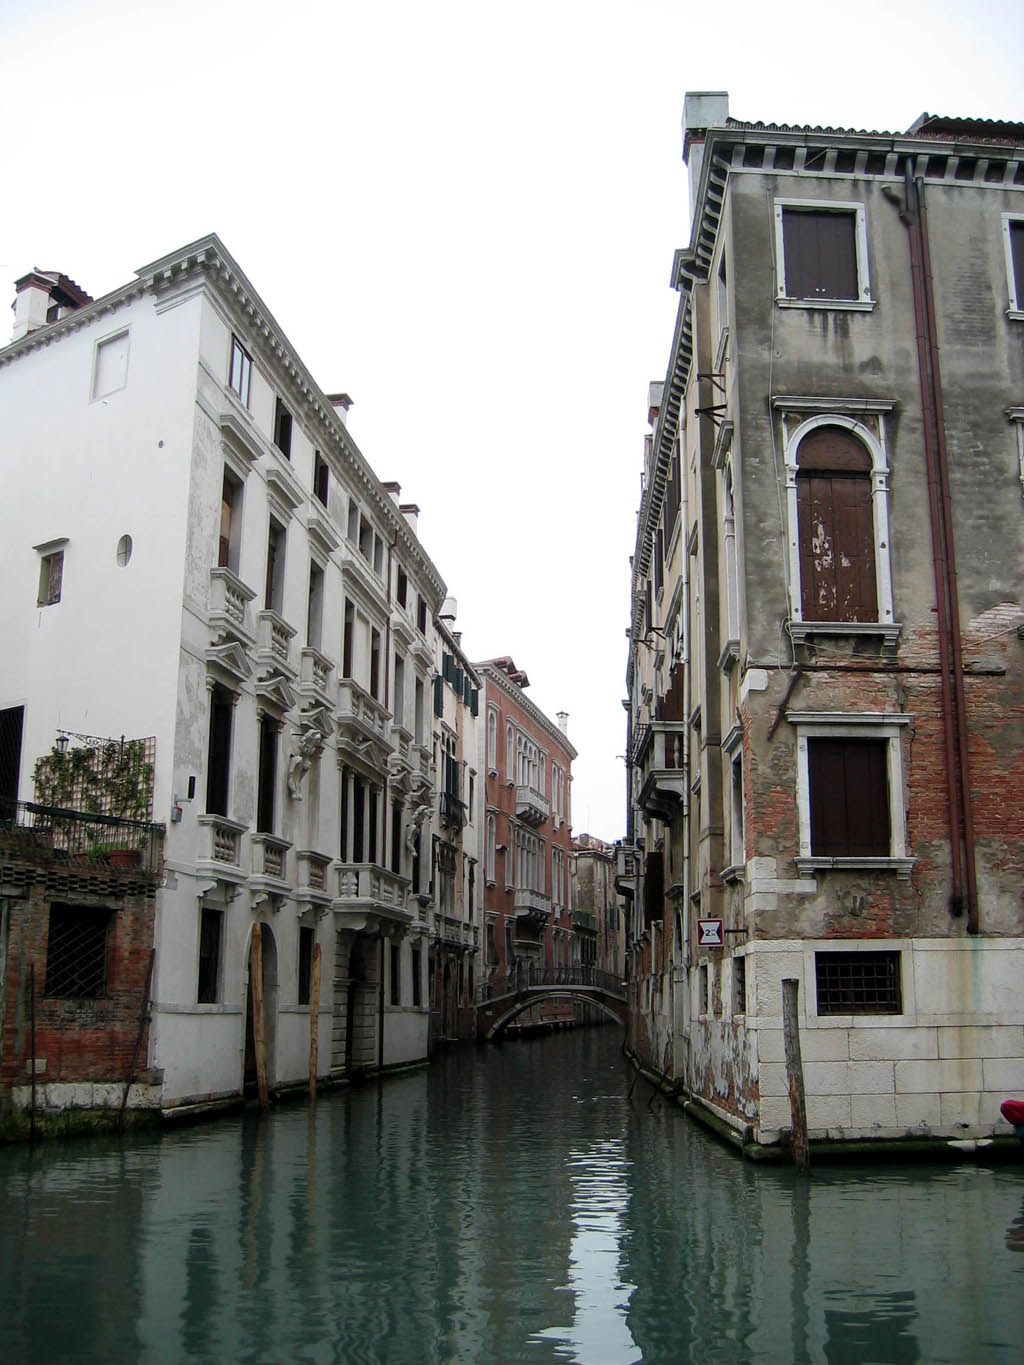 Buildings along a canal